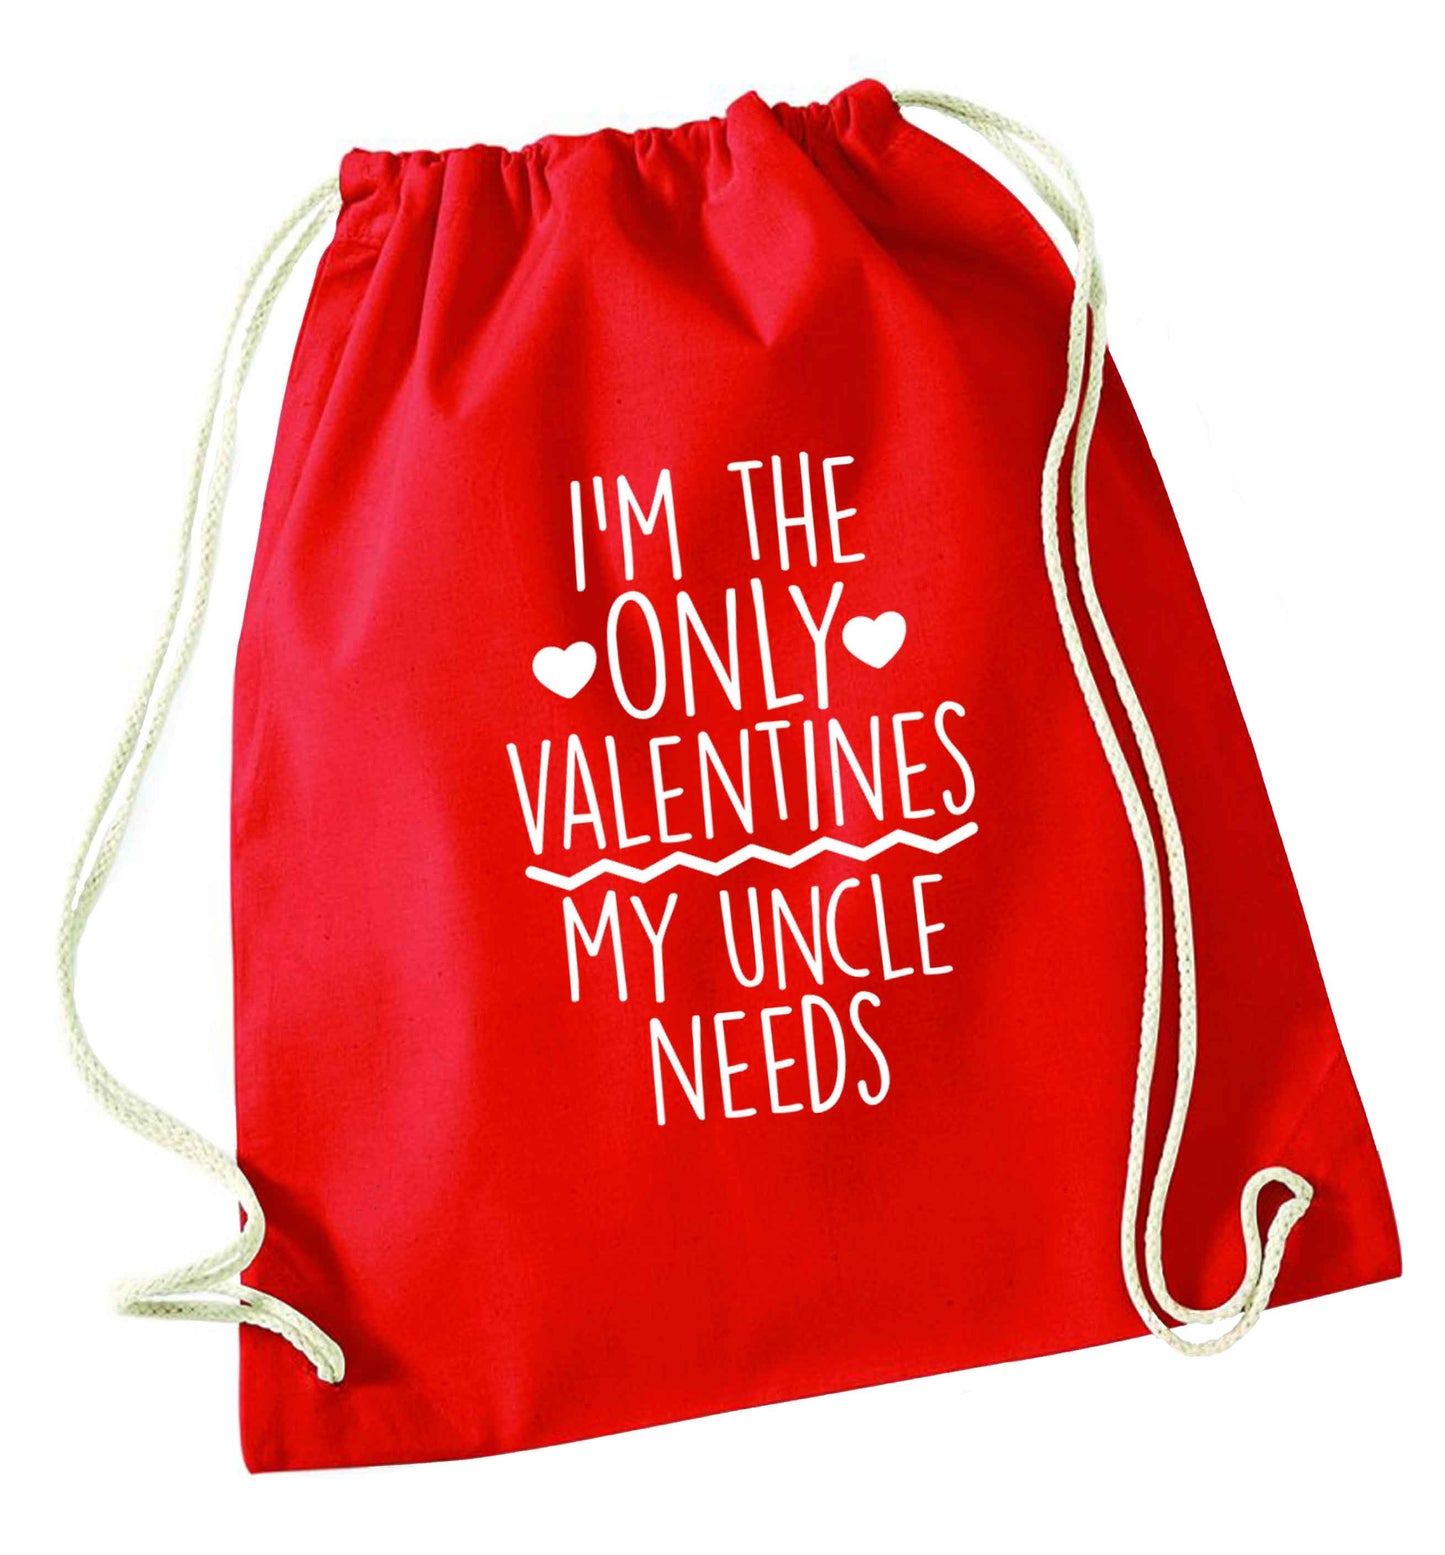 I'm the only valentines my uncle needs red drawstring bag 